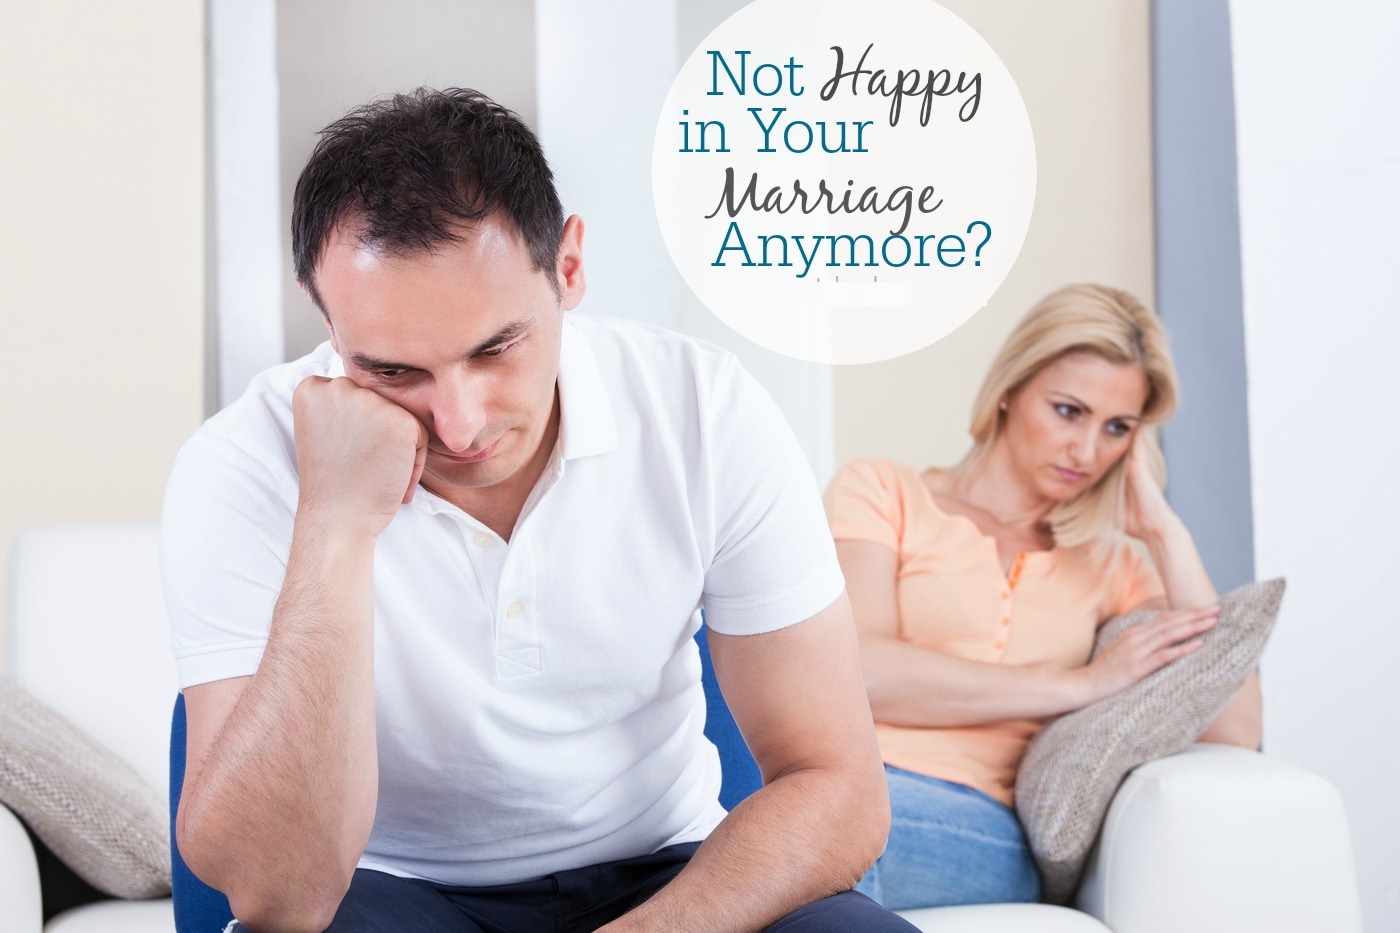 What To Do When You Are Not Happy In Your Marriage?